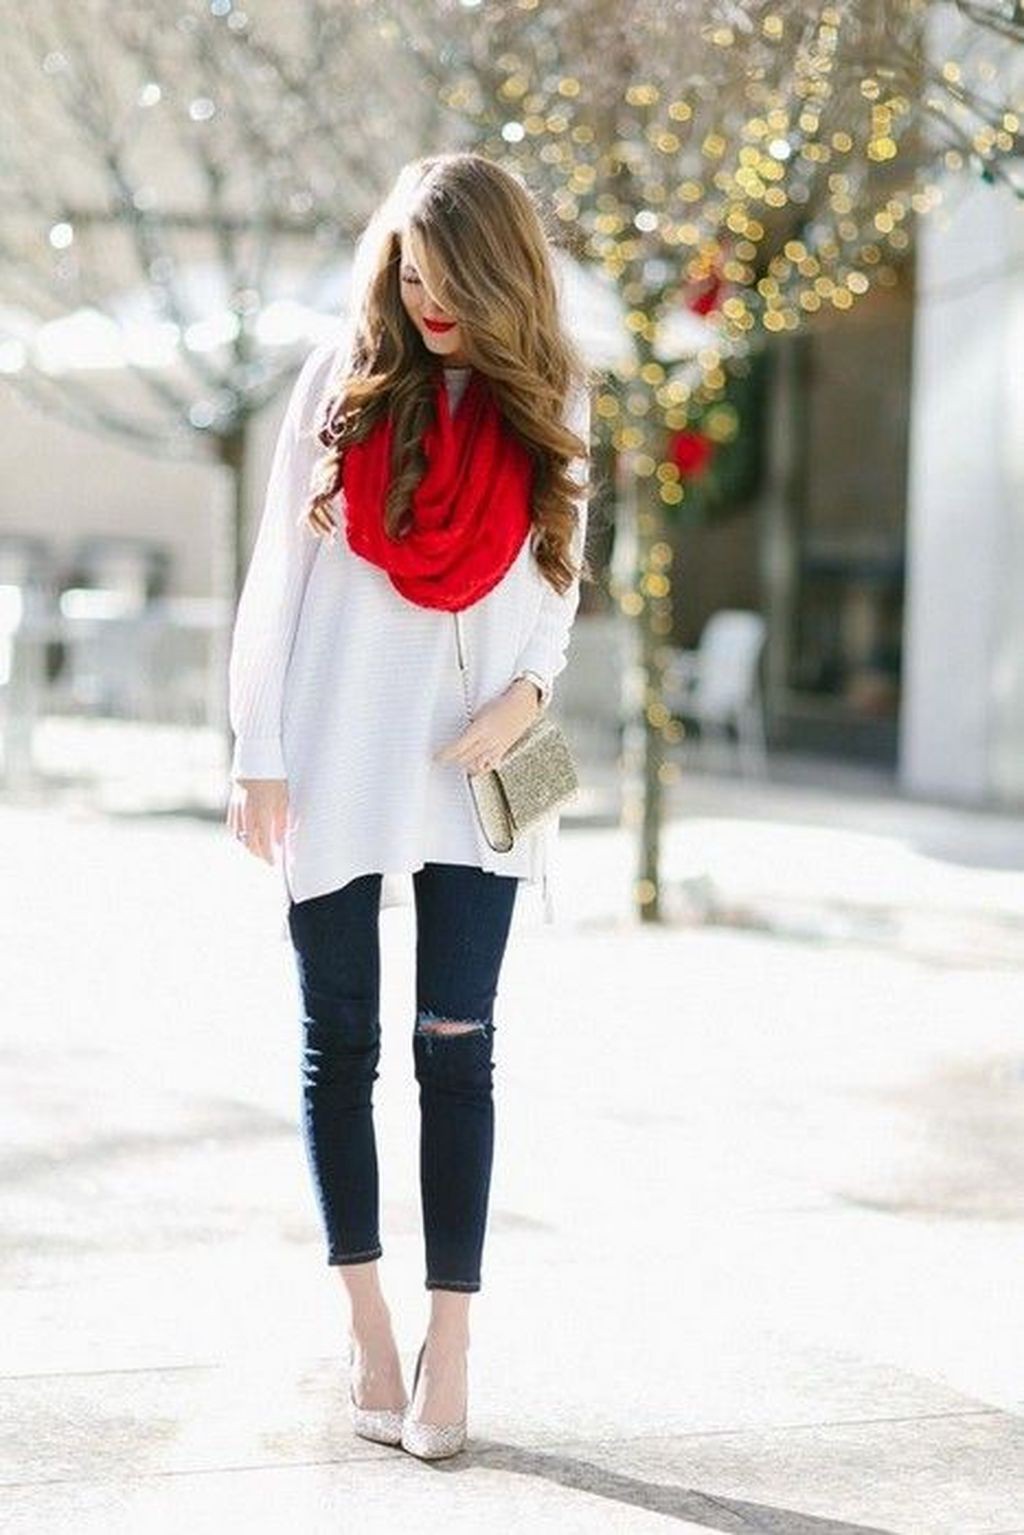 Casual outfit ideas for cute christmas ...